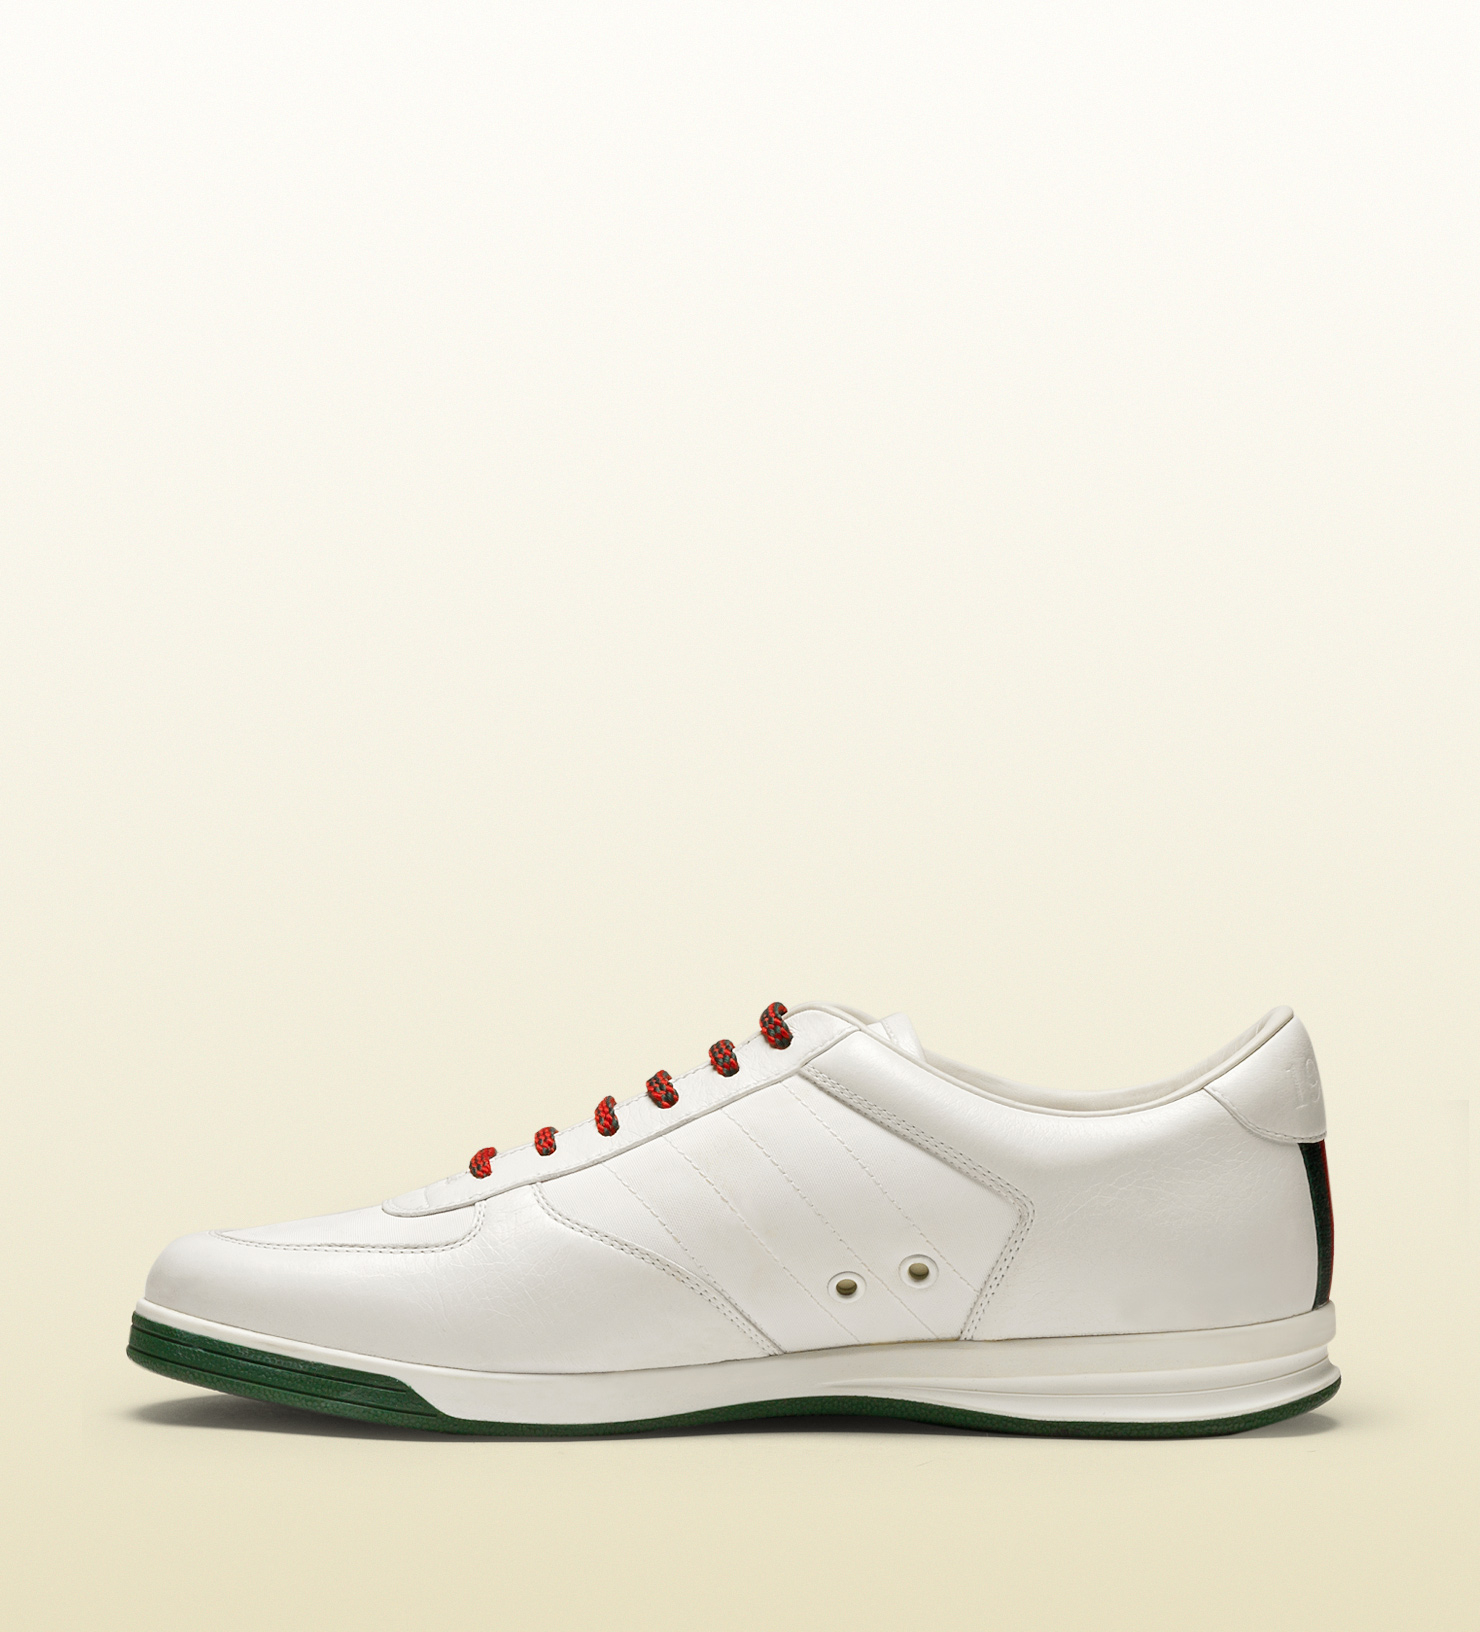 Gucci 1984 Low Top Sneaker In Leather in White for Men